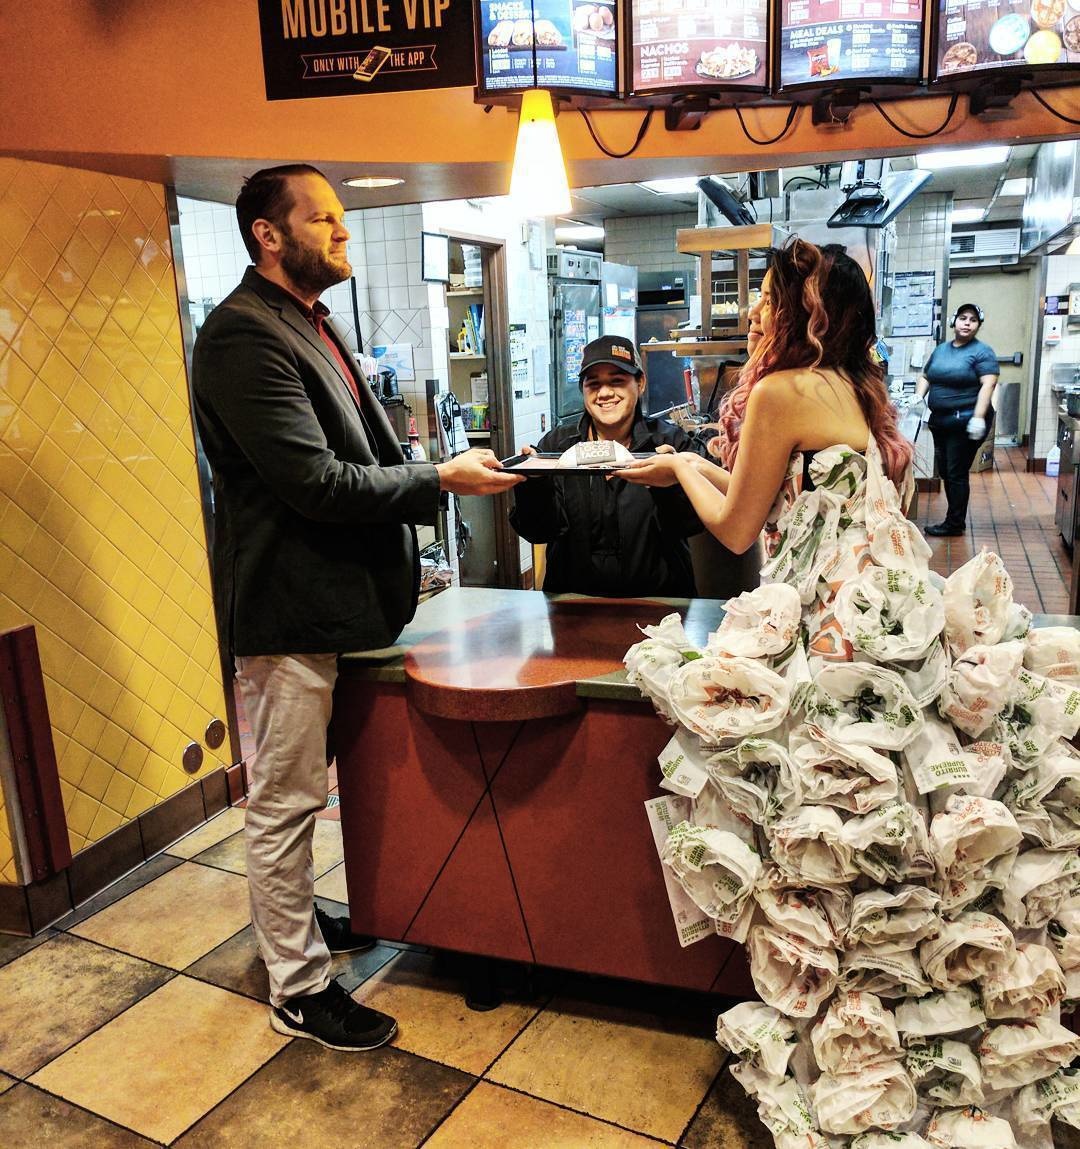 Seriously! Someone created a wedding dress out of burrito wrappings. 